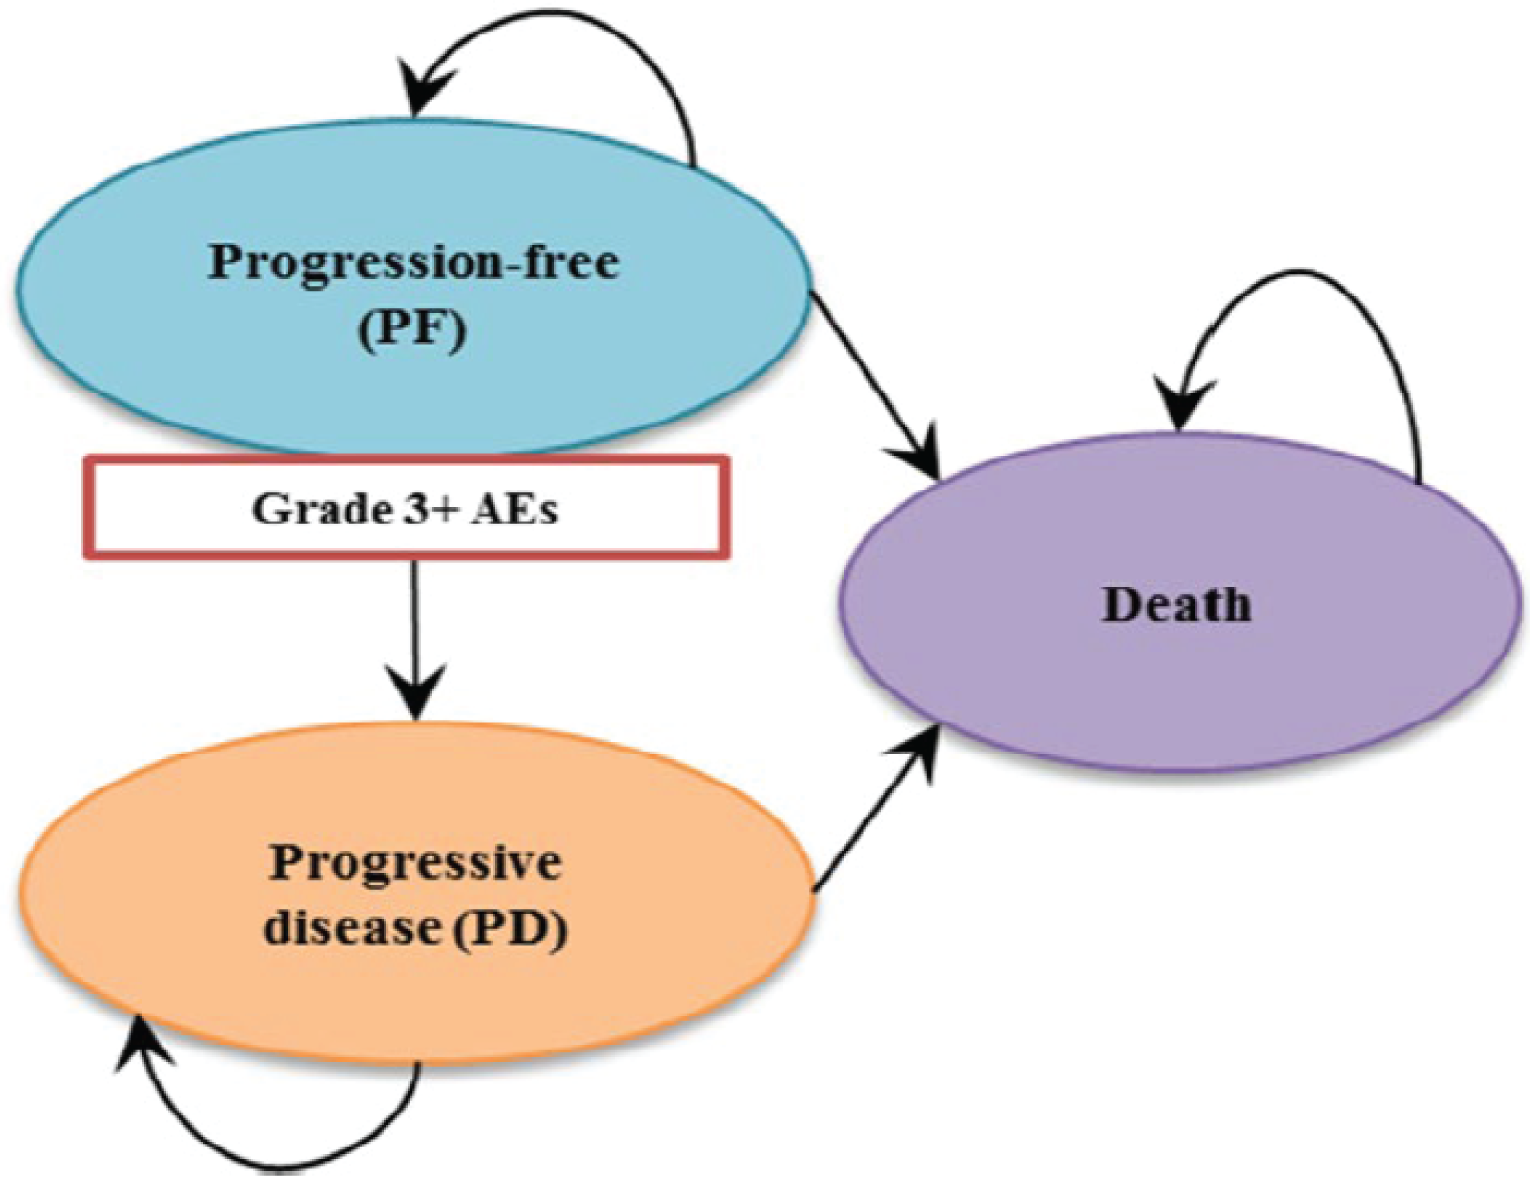 The sponsor’s model structure consisted of three health states: progression-free, progressive disease, and death. Patients could move from progression-free to progressive disease, and patients in both the progression-free and progressive disease states could move to the absorbing death state.